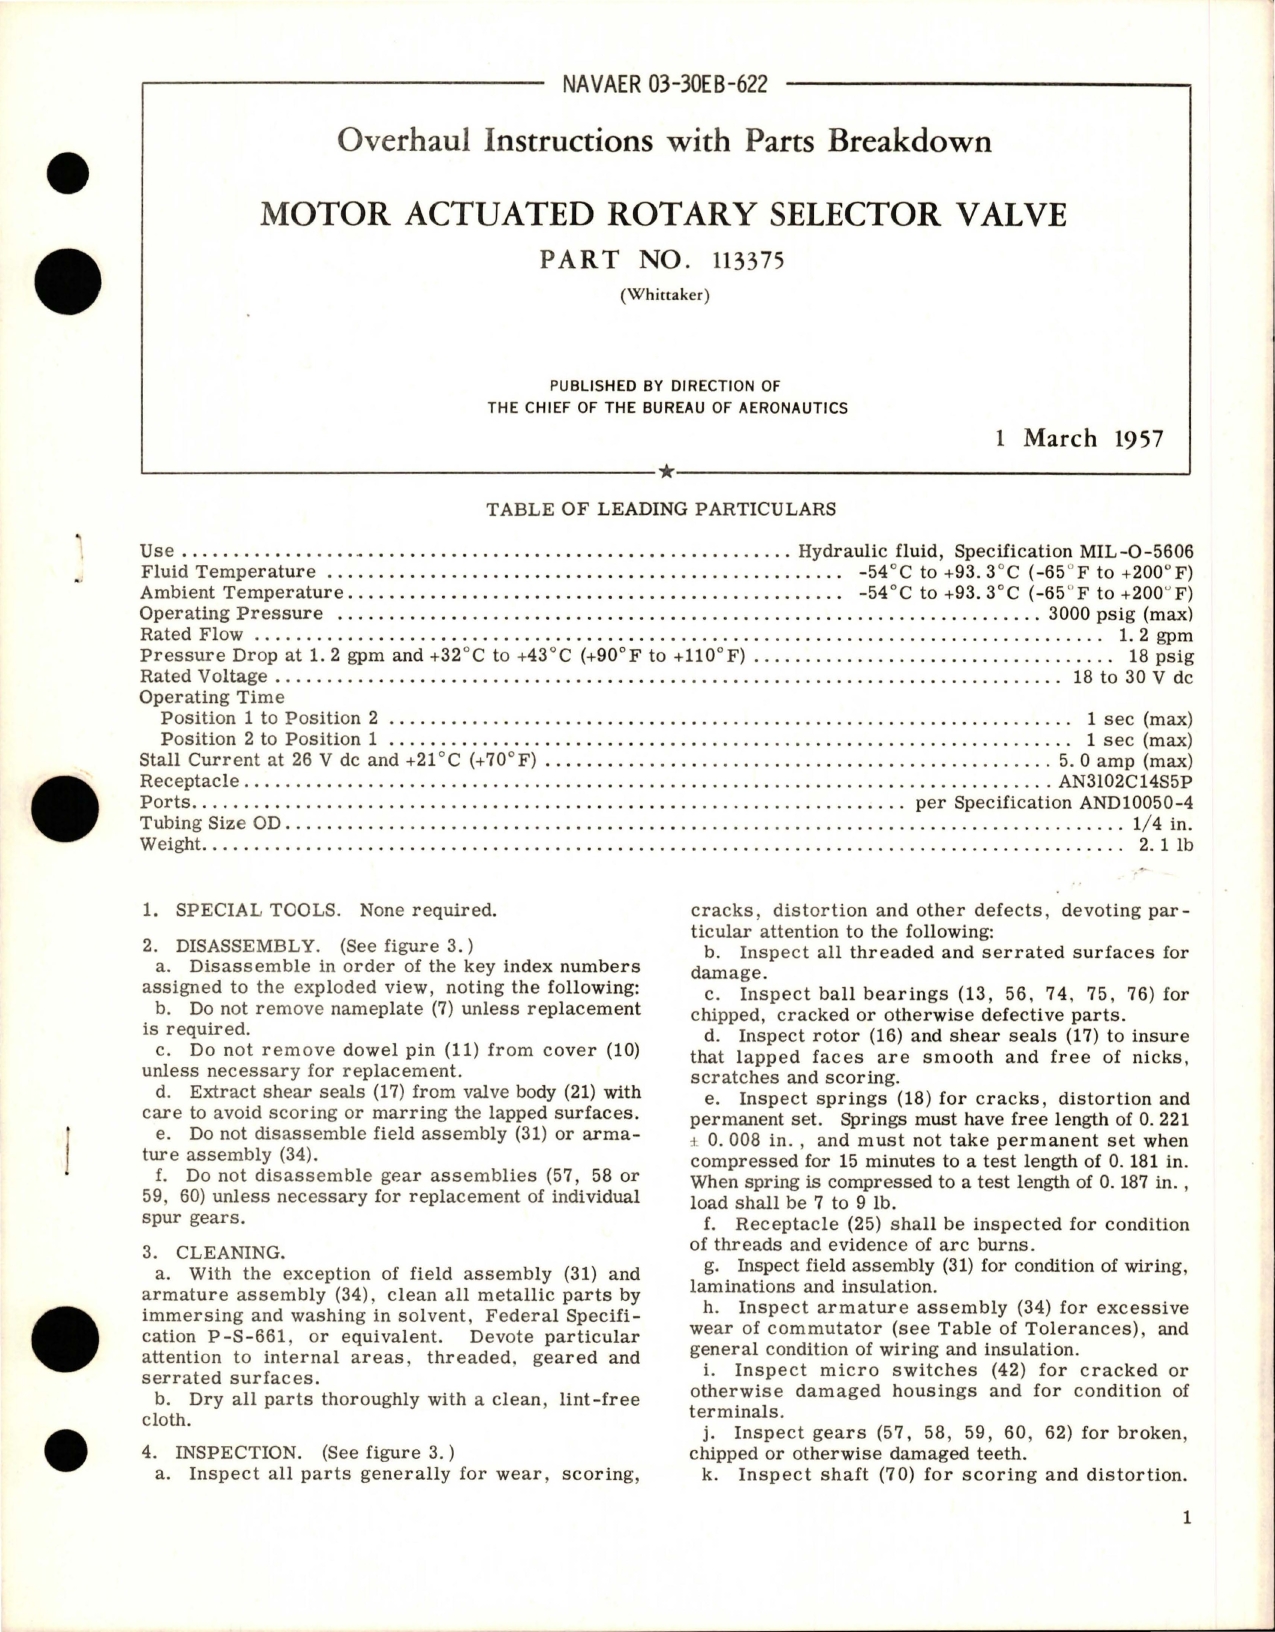 Sample page 1 from AirCorps Library document: Overhaul Instructions with Parts Breakdown for Motor Actuated Rotary Selector Valve - Part 113375